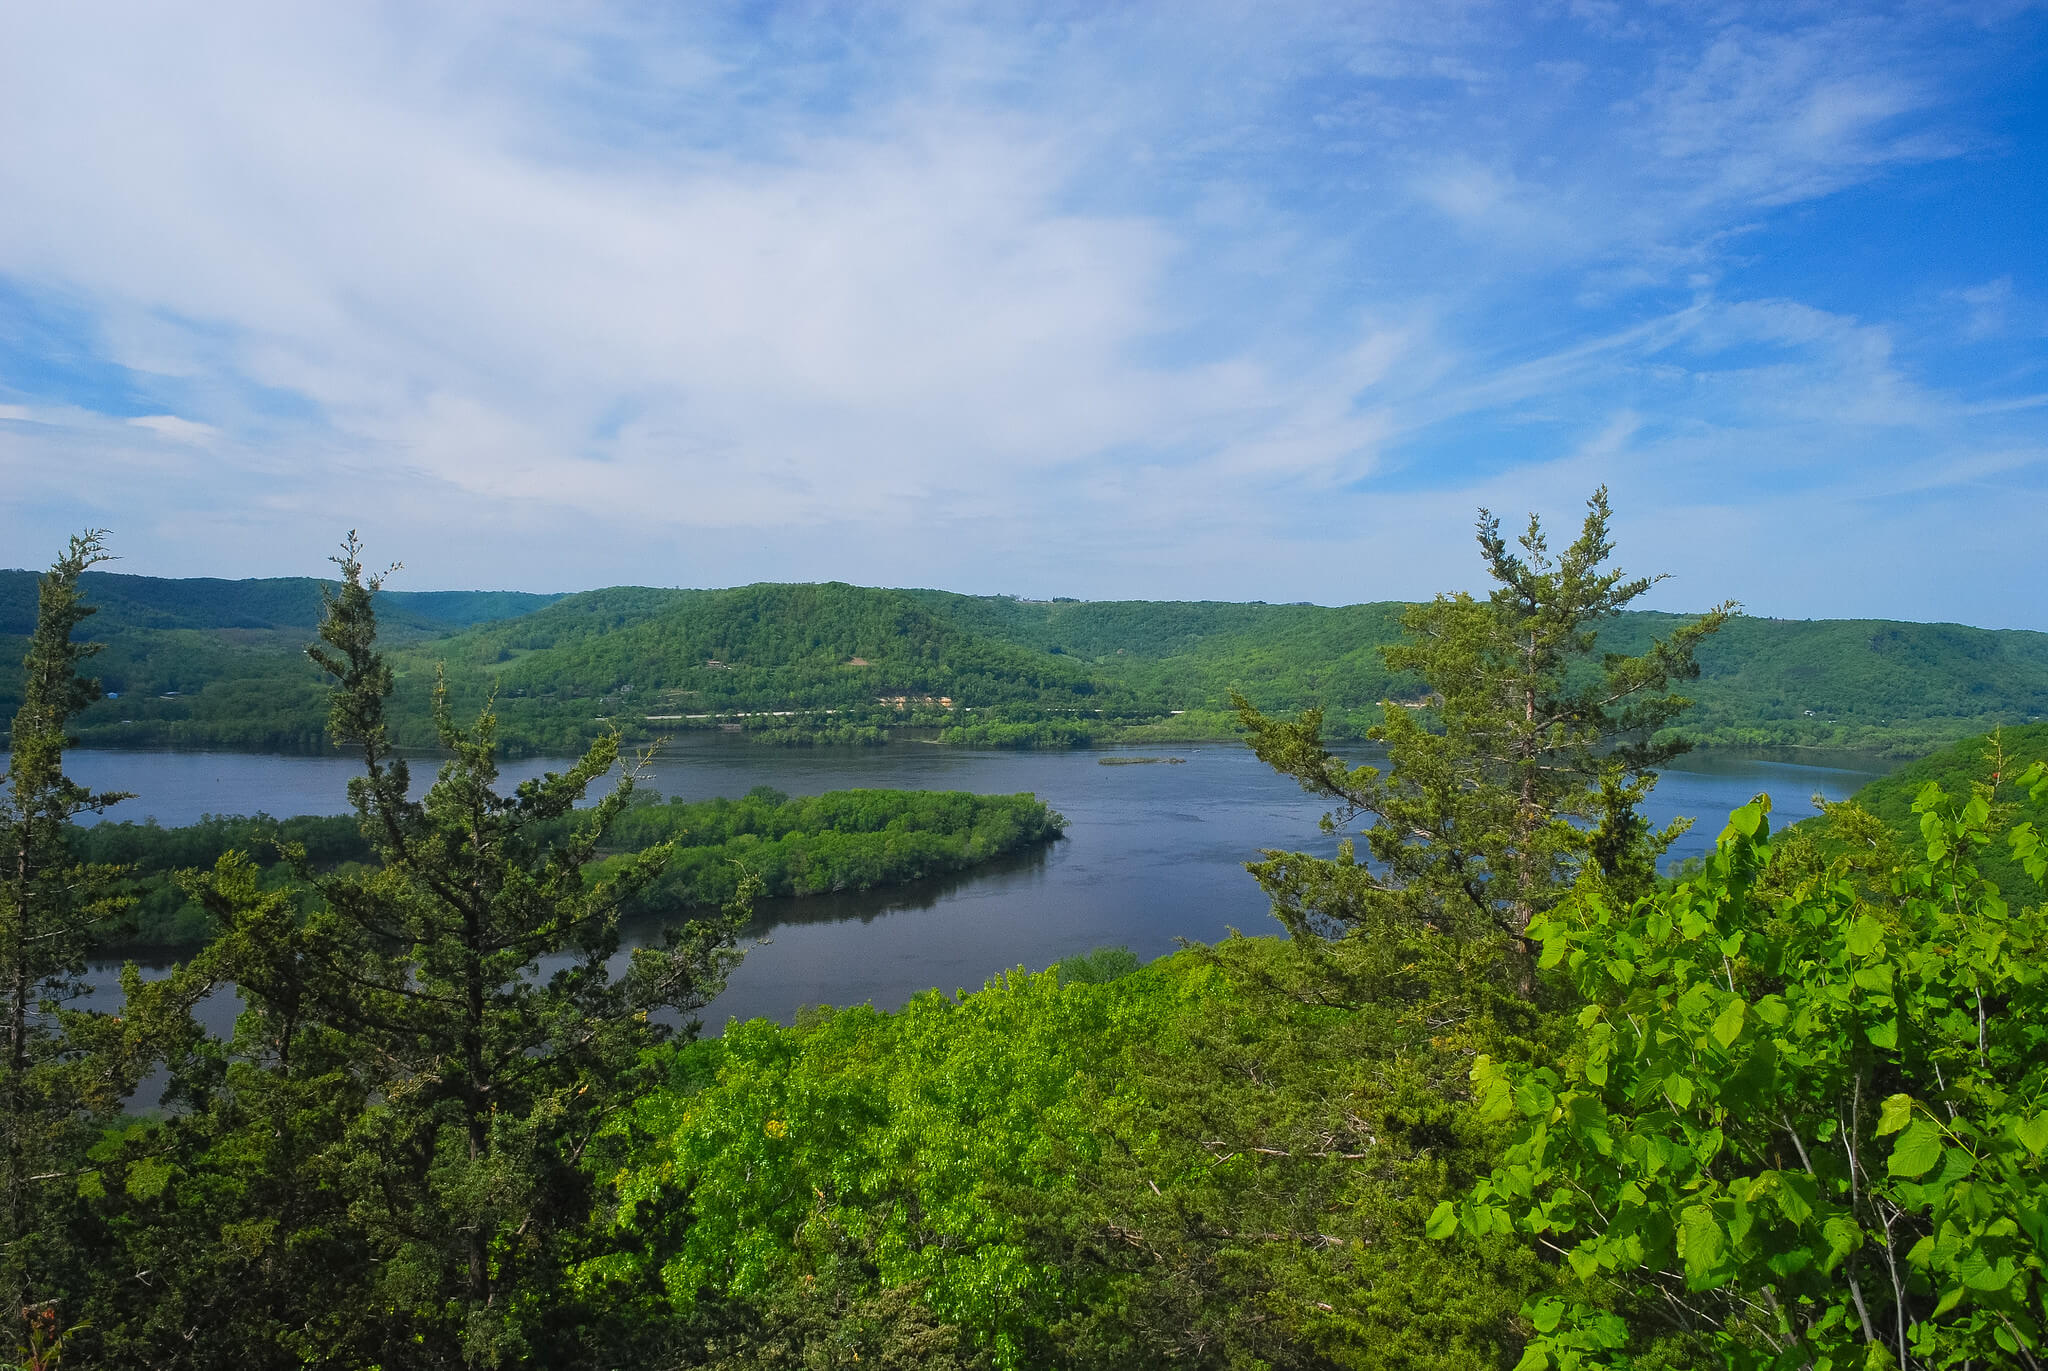 Knowles-Nelson Stewardship Program, view from a Missisippi River bluff looking down on the river surrounded by green bushes and trees in summer